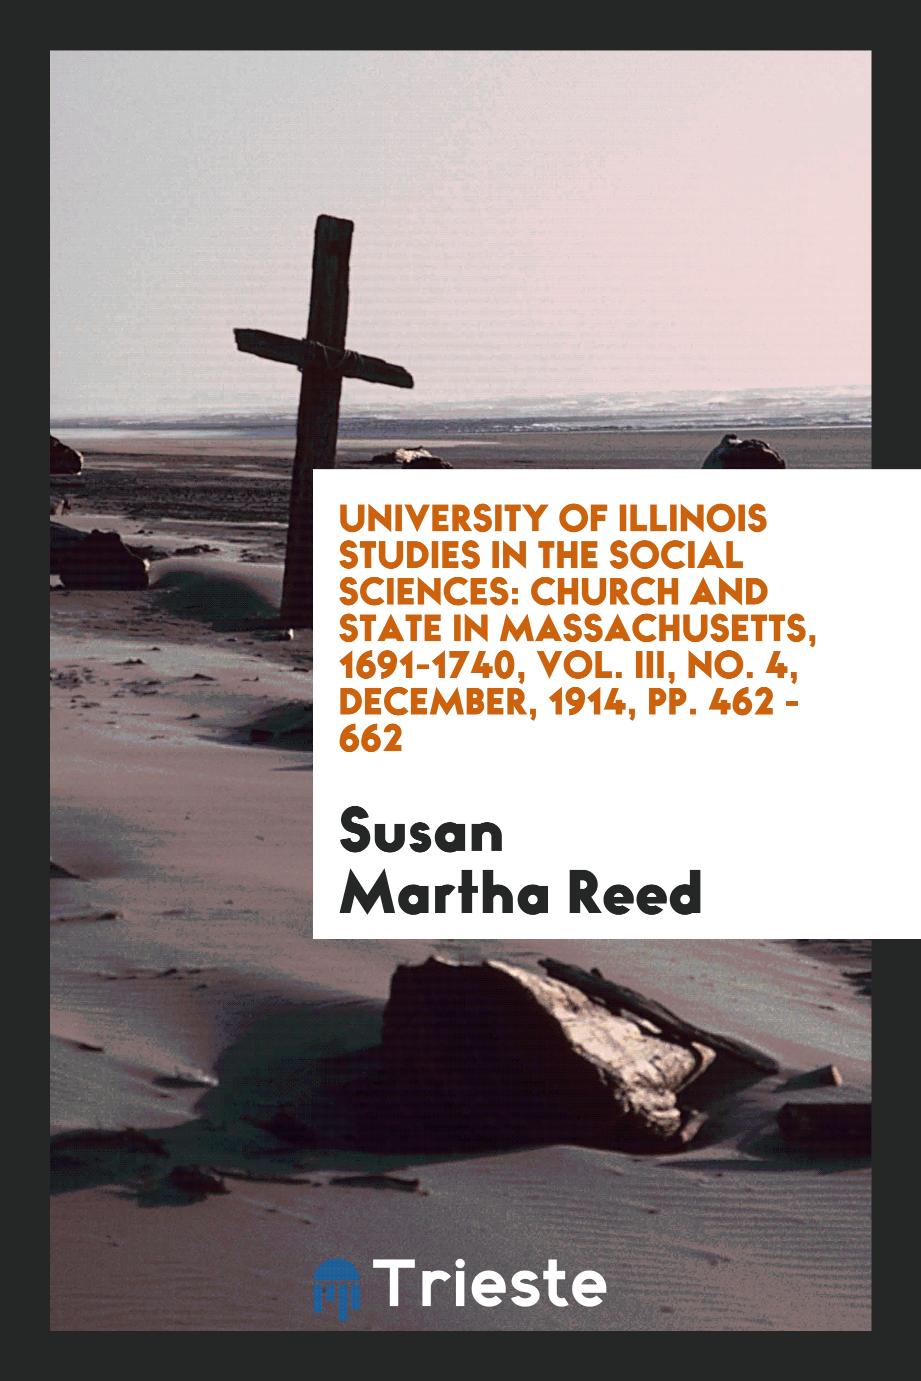 University of illinois studies in the social sciences: Church and state in Massachusetts, 1691-1740, Vol. III, No. 4, December, 1914, pp. 462 - 662